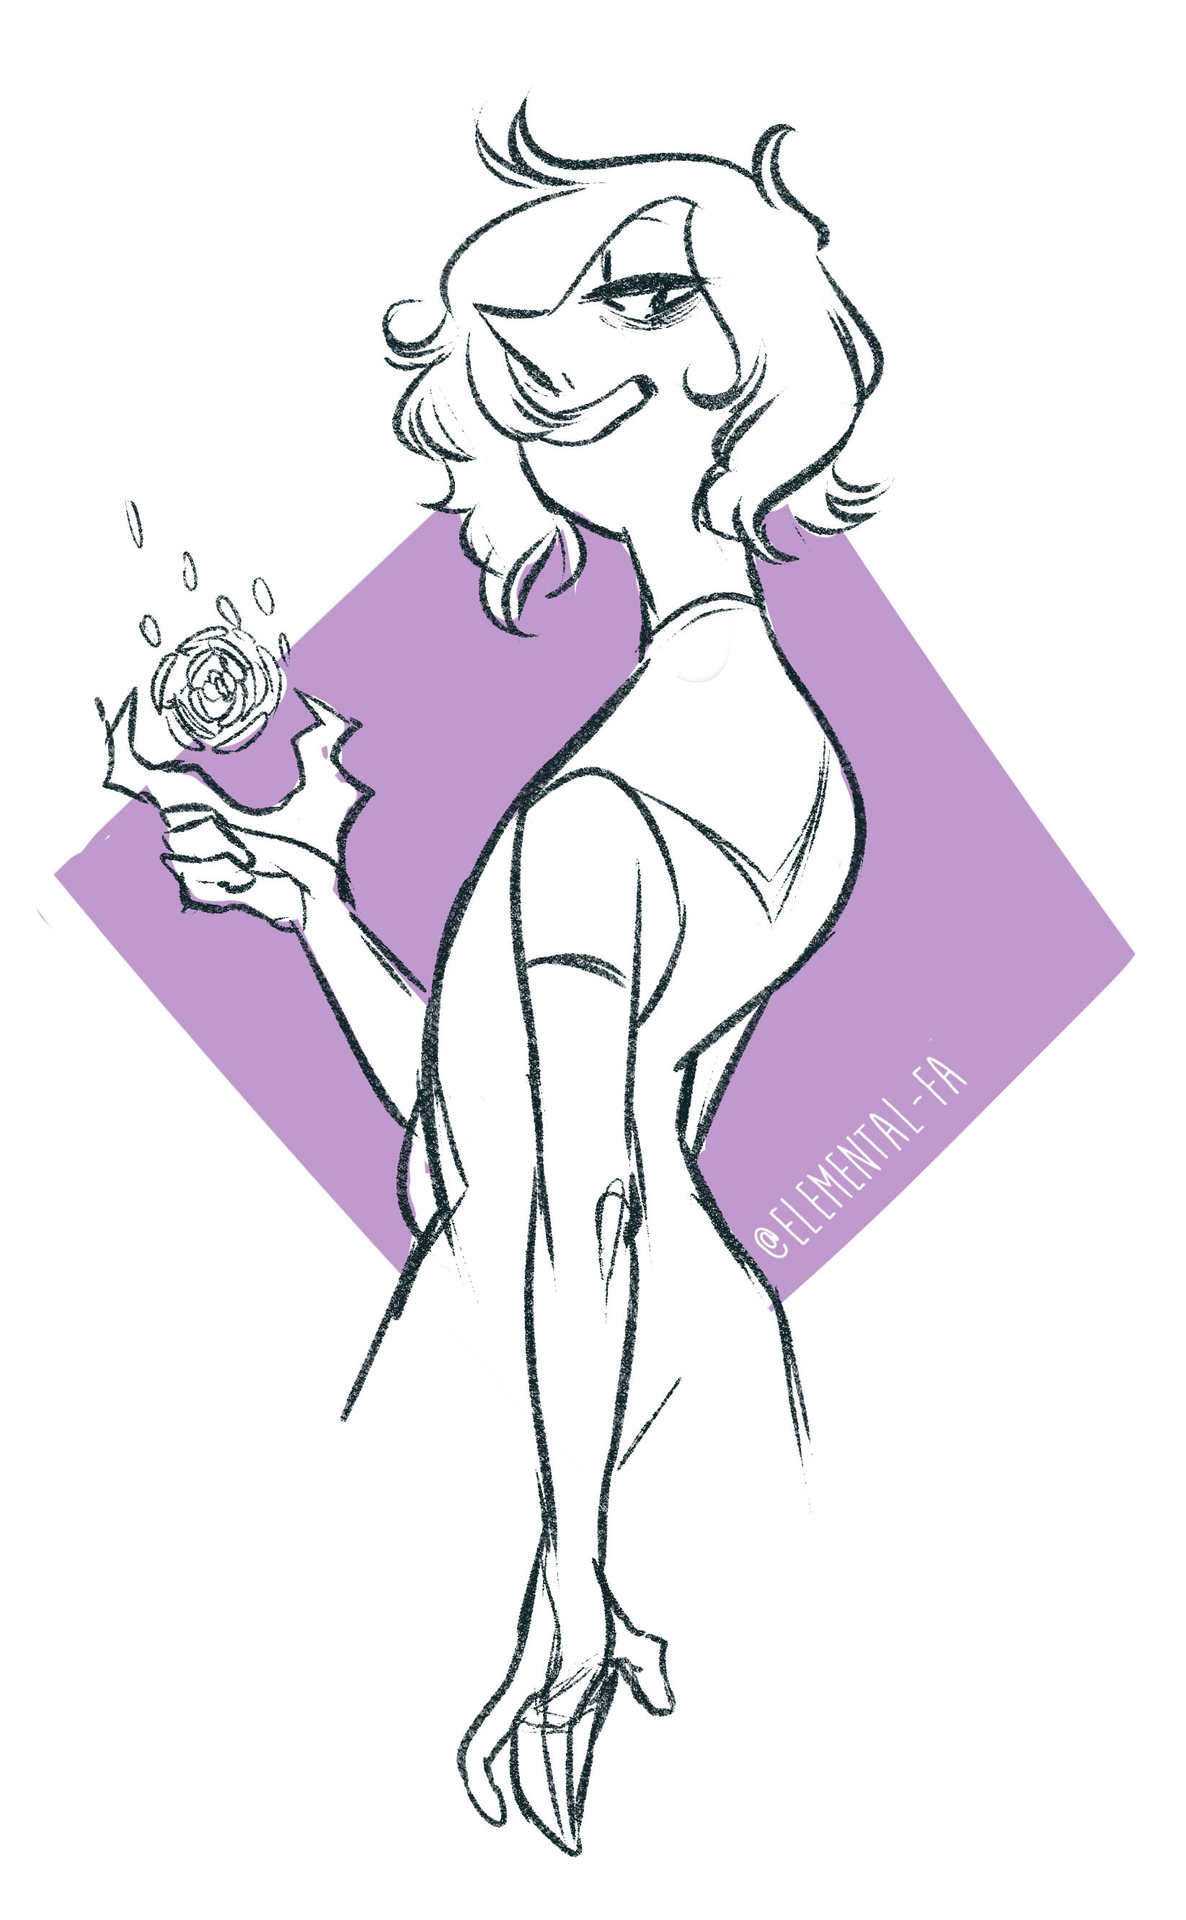 Hope y'all like this 6AM sketch of a beautiful pearl OC!! I am tired and my body needs sleep but the bitch just does’t want me to Character belongs to @revolver-d check em out!!